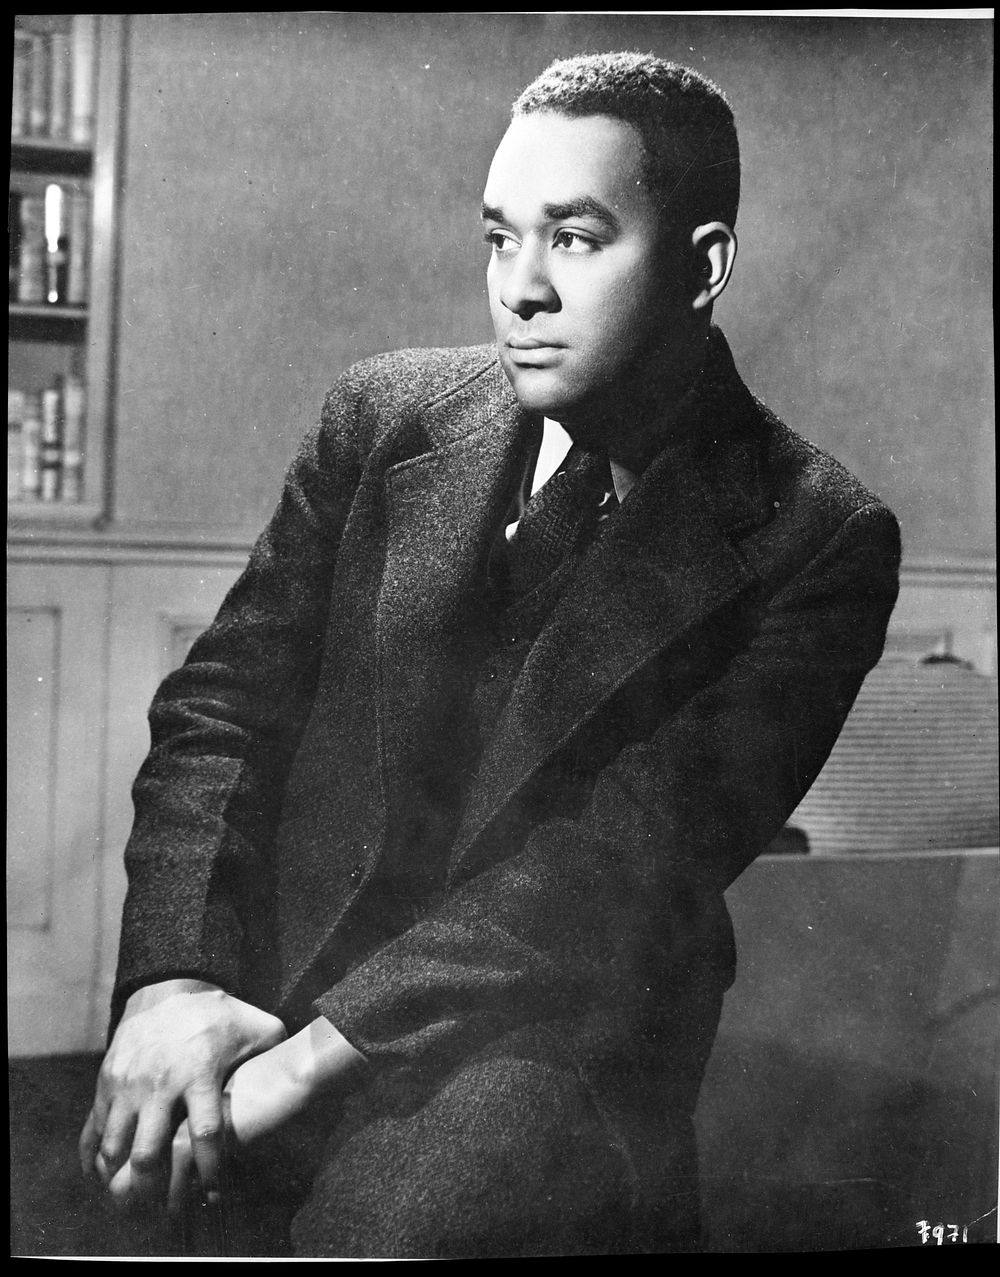 [Untitled photo shows: Richard Wright, author]. Sourced from the Library of Congress.